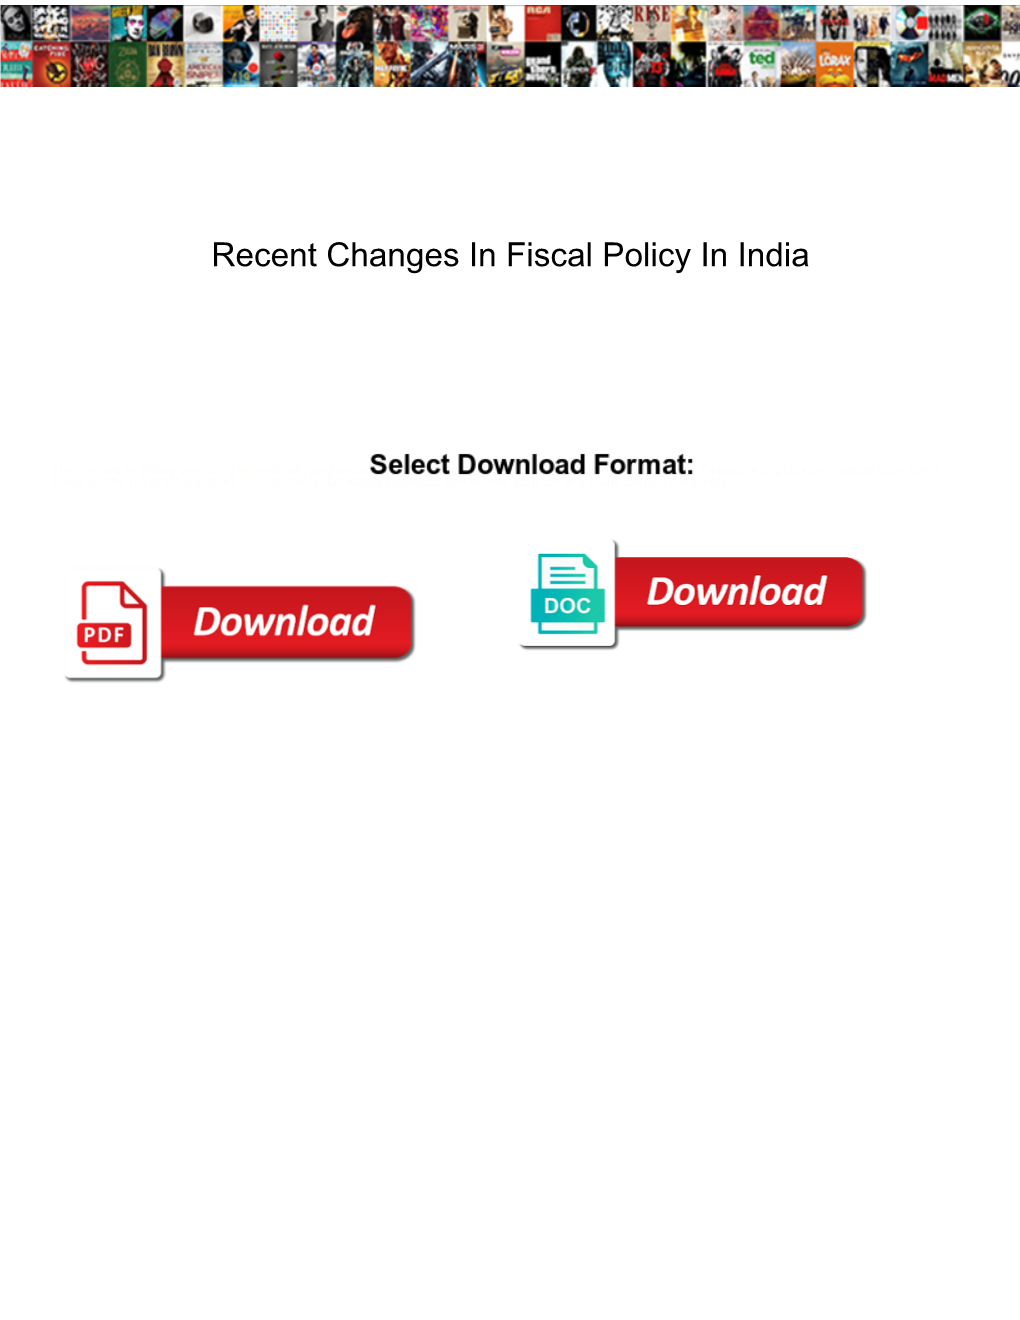 Recent Changes in Fiscal Policy in India